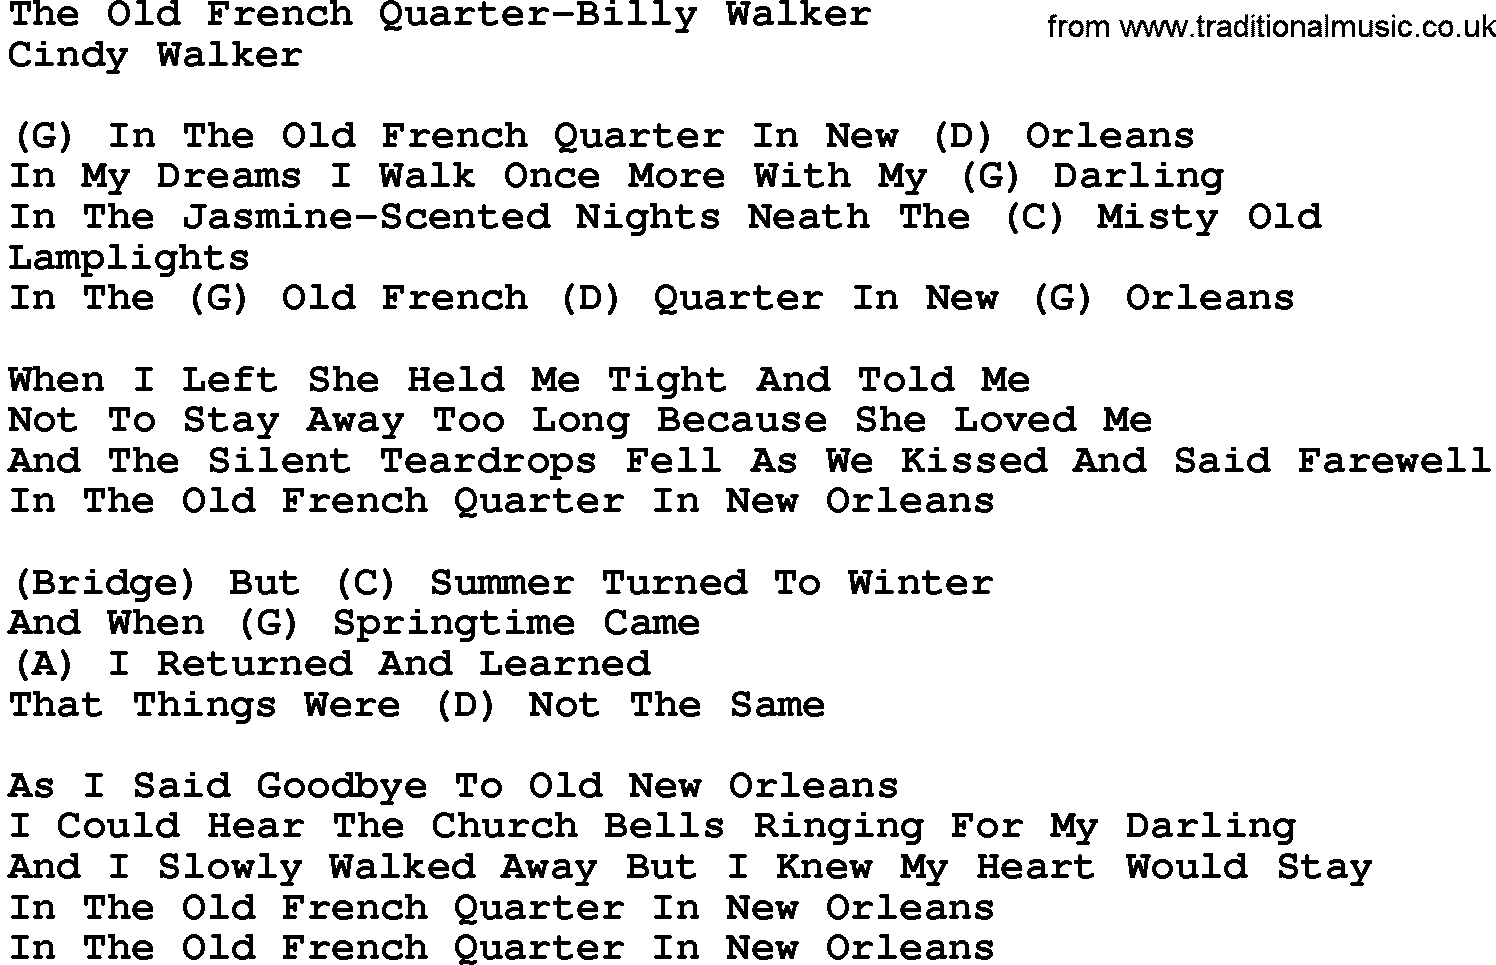 Country music song: The Old French Quarter-Billy Walker lyrics and chords